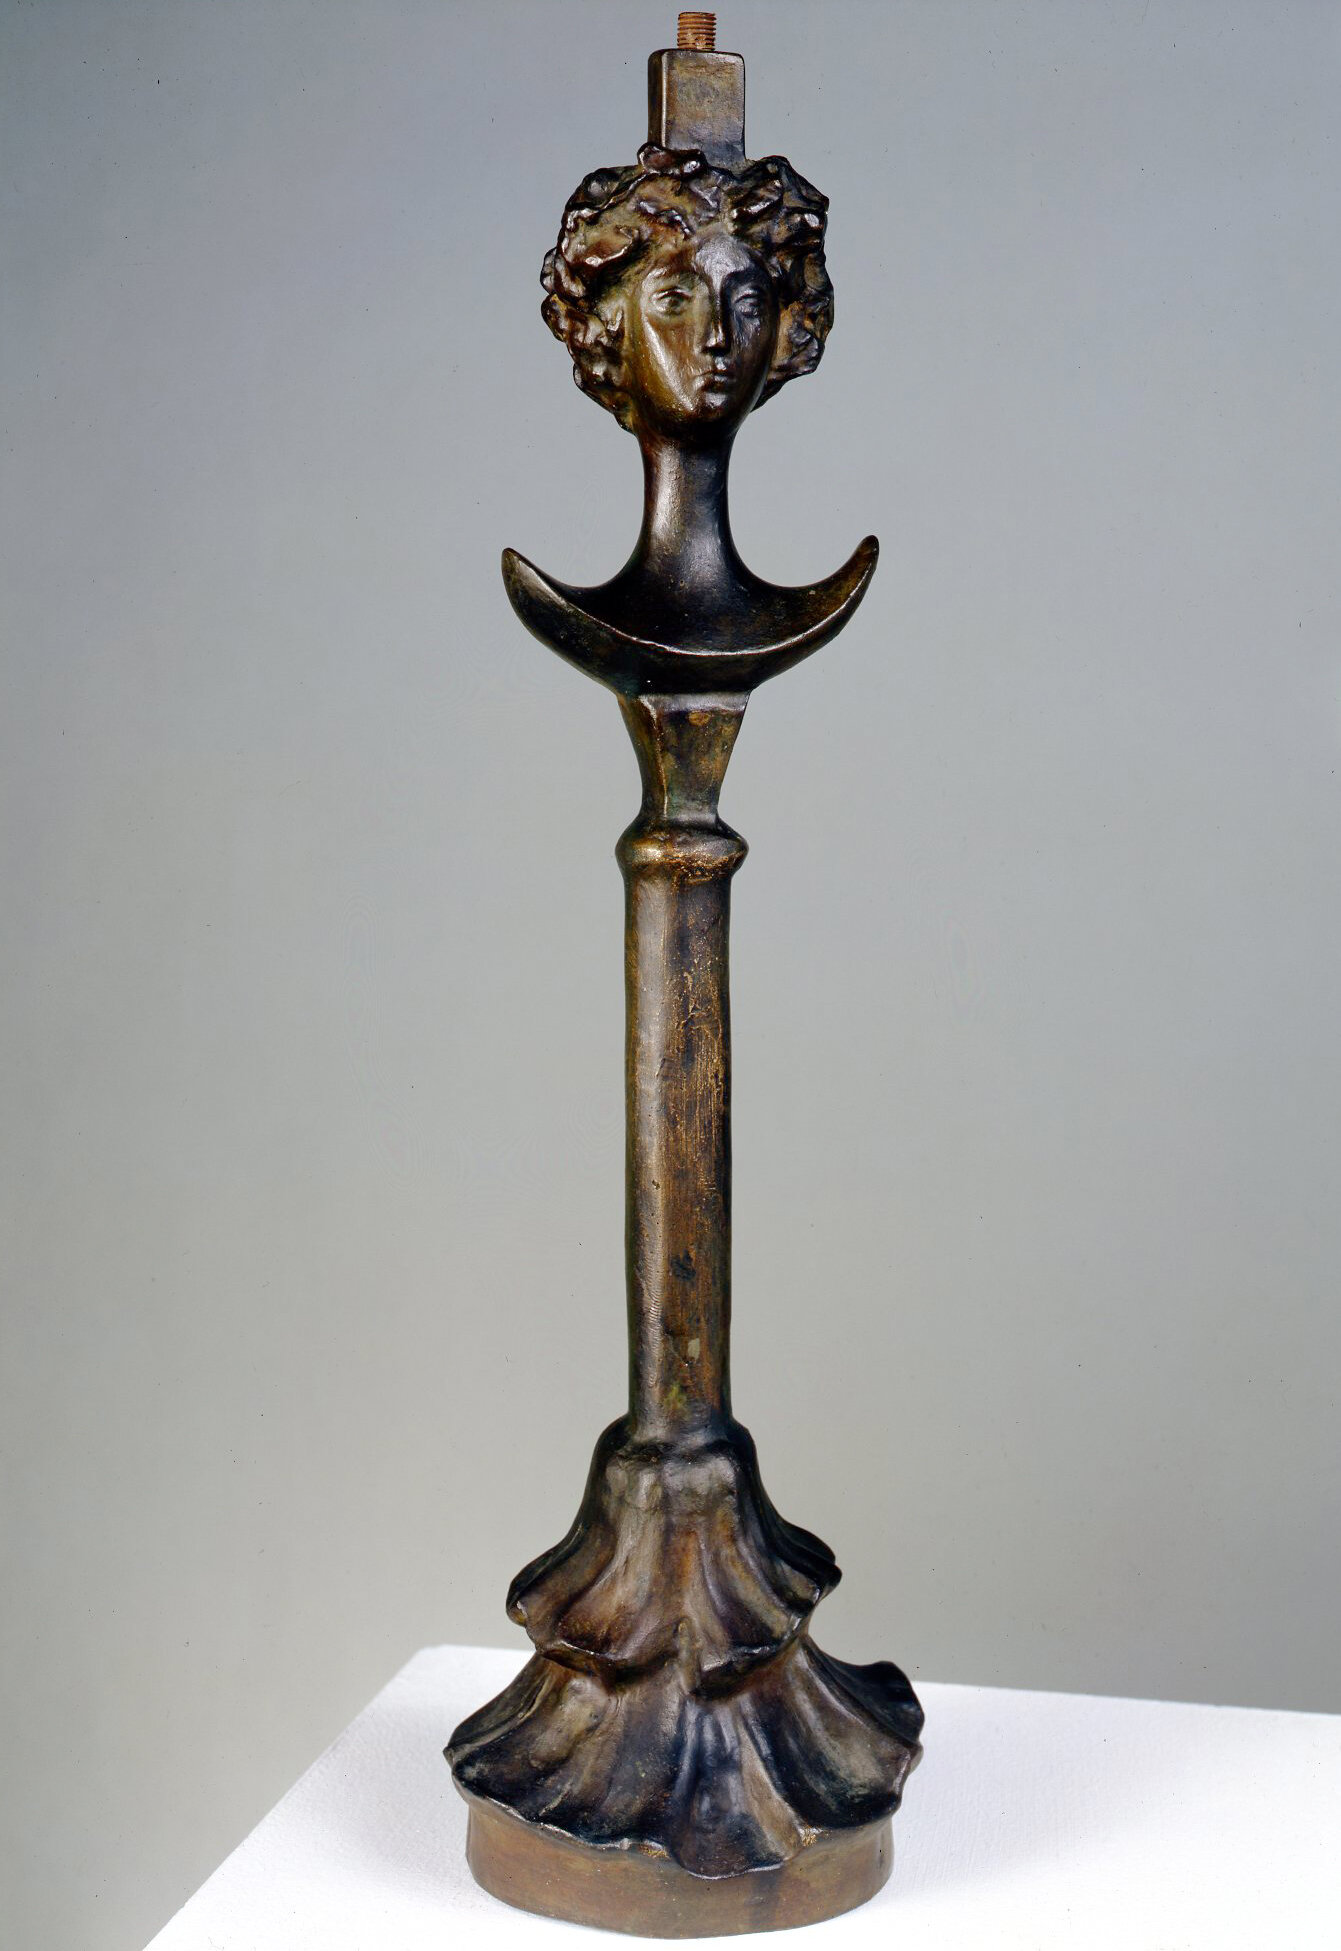  Diego Giacometti   Woman’s Head Table Lamp  cast bronze, dark brown patina 20 1/2h inches (52.1 cm) 